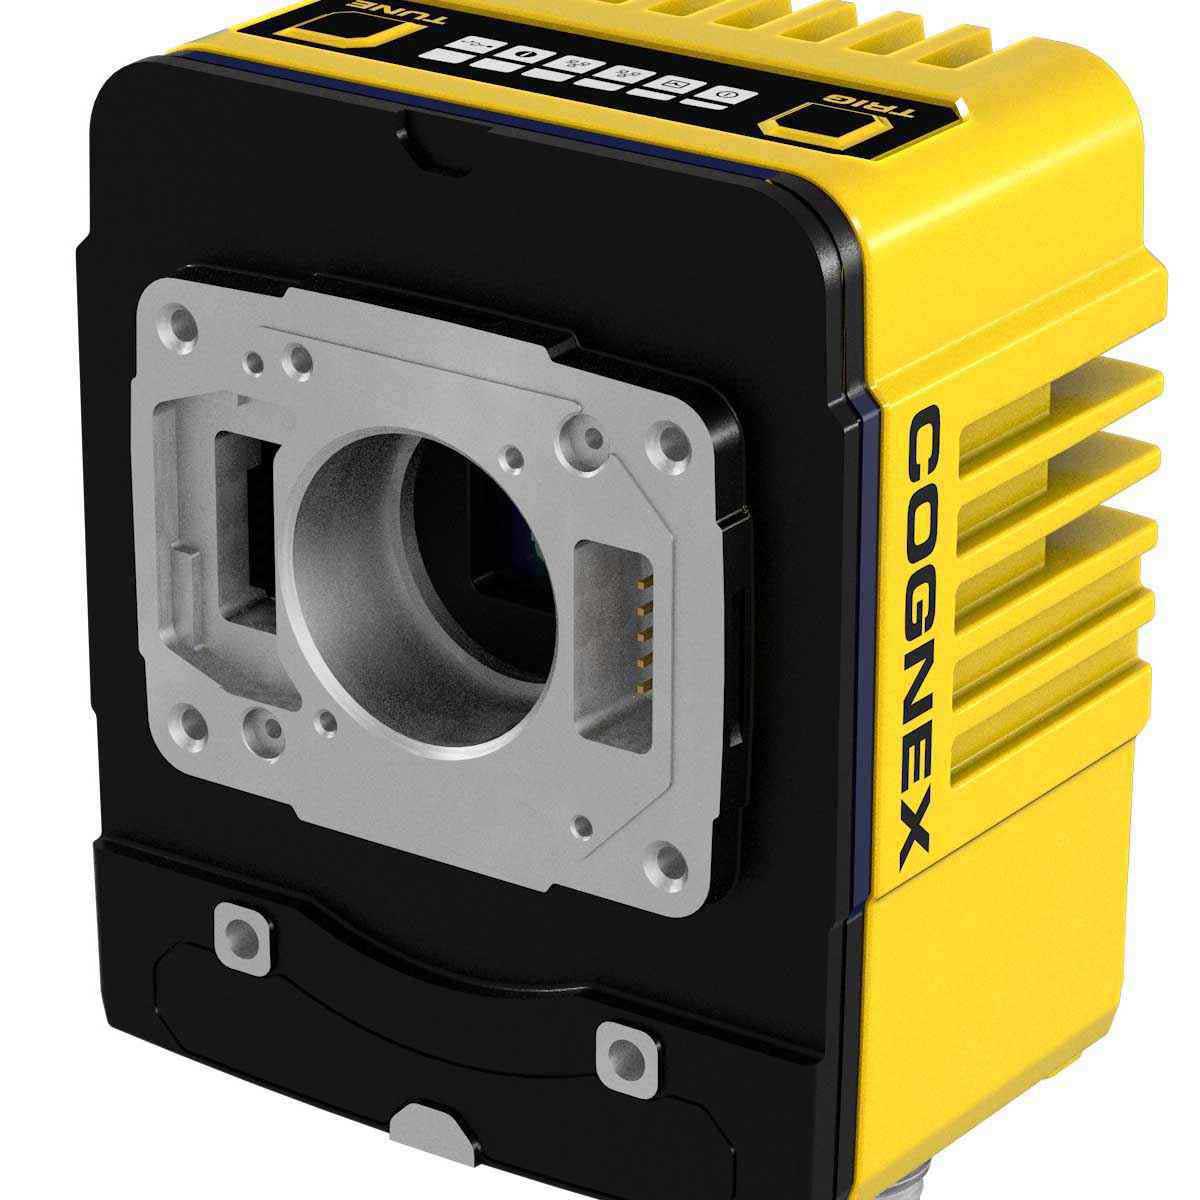 IS3803CS-00001-SA COGNEX IS3803CS 3.2MP System Only All EL